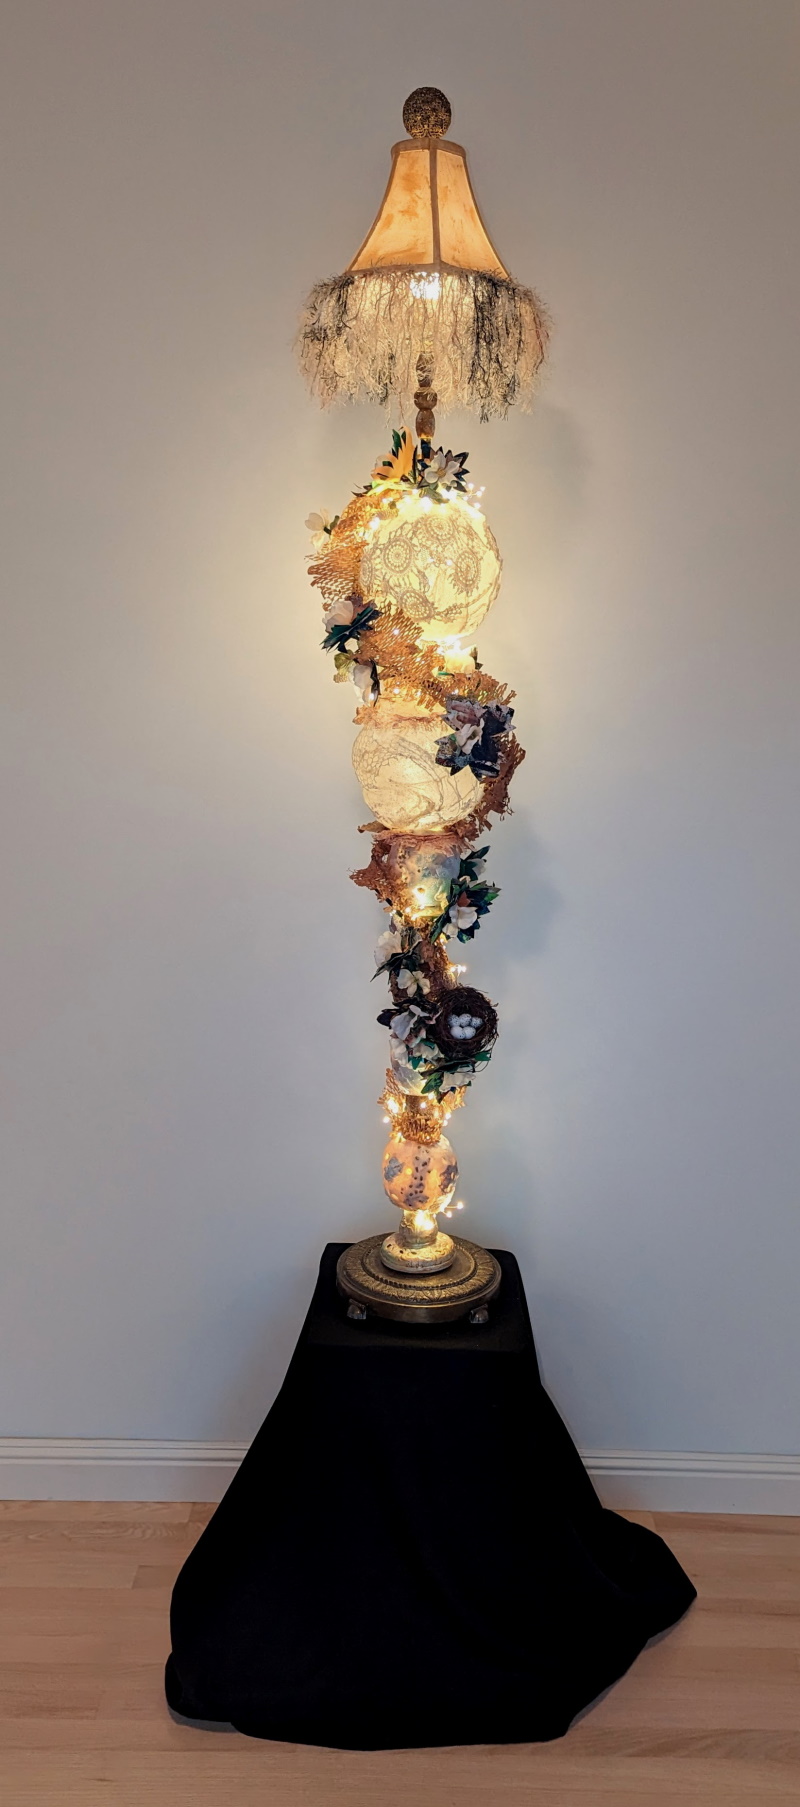 This is a Liminal 3D Assemblage Lamp. It is my first attempt to illuminate an assemblage work with electricity. Every element was made to illuminate from within and without.